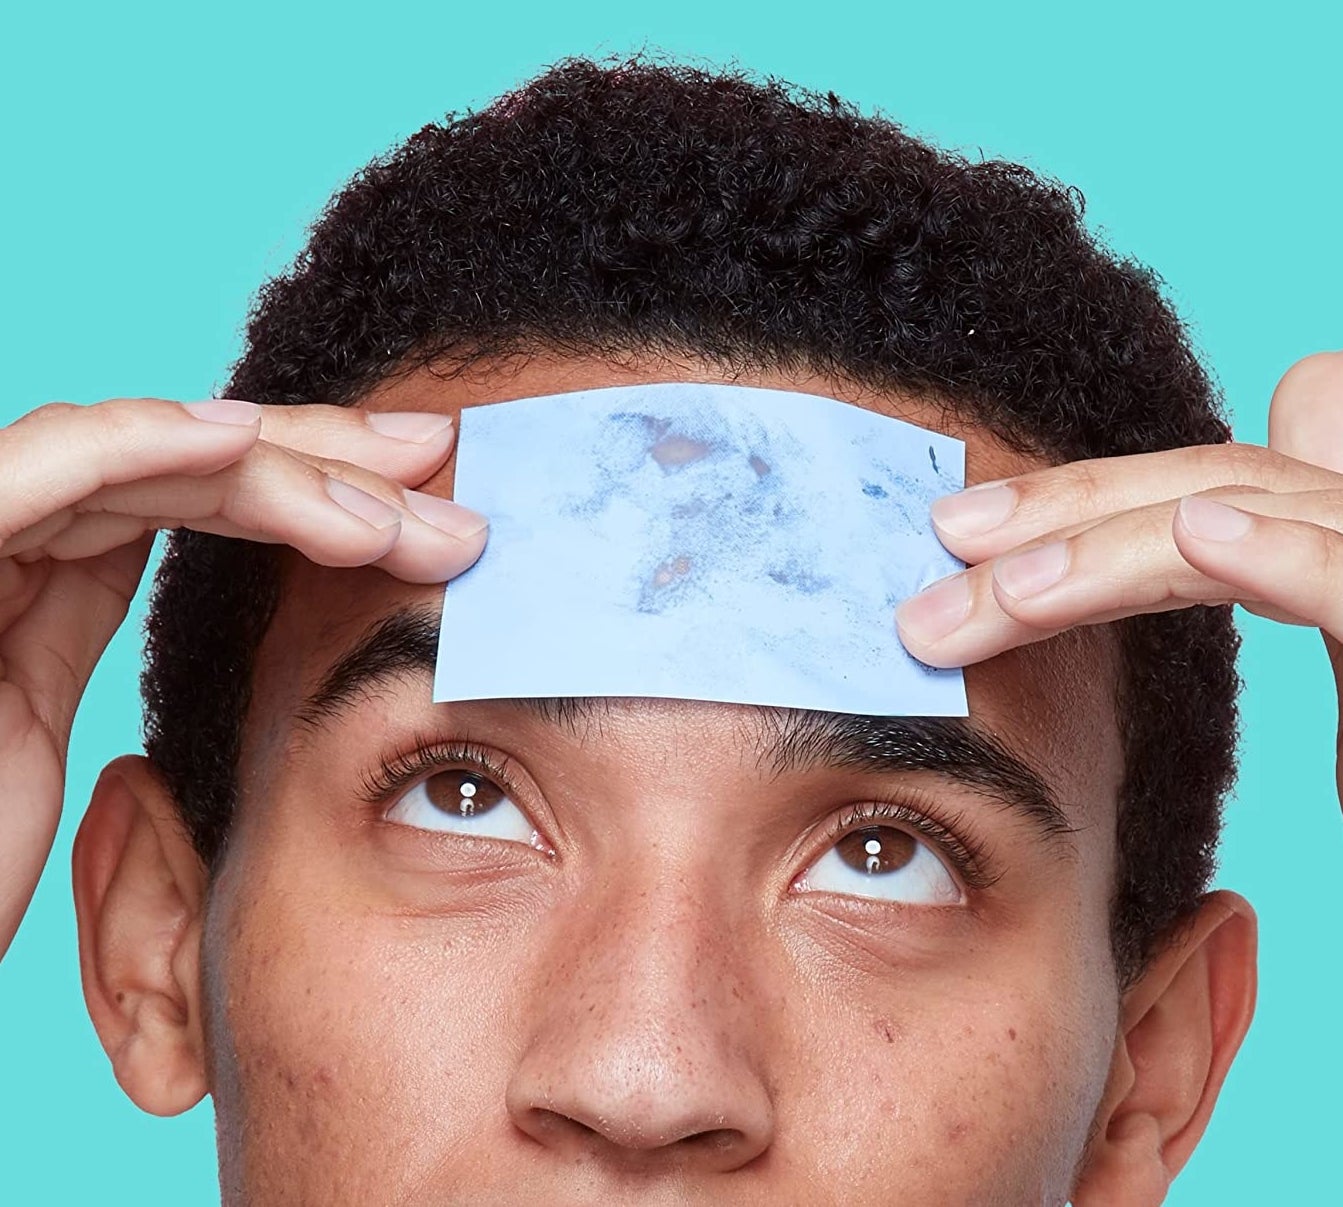 A person using a paper to blot their forehead